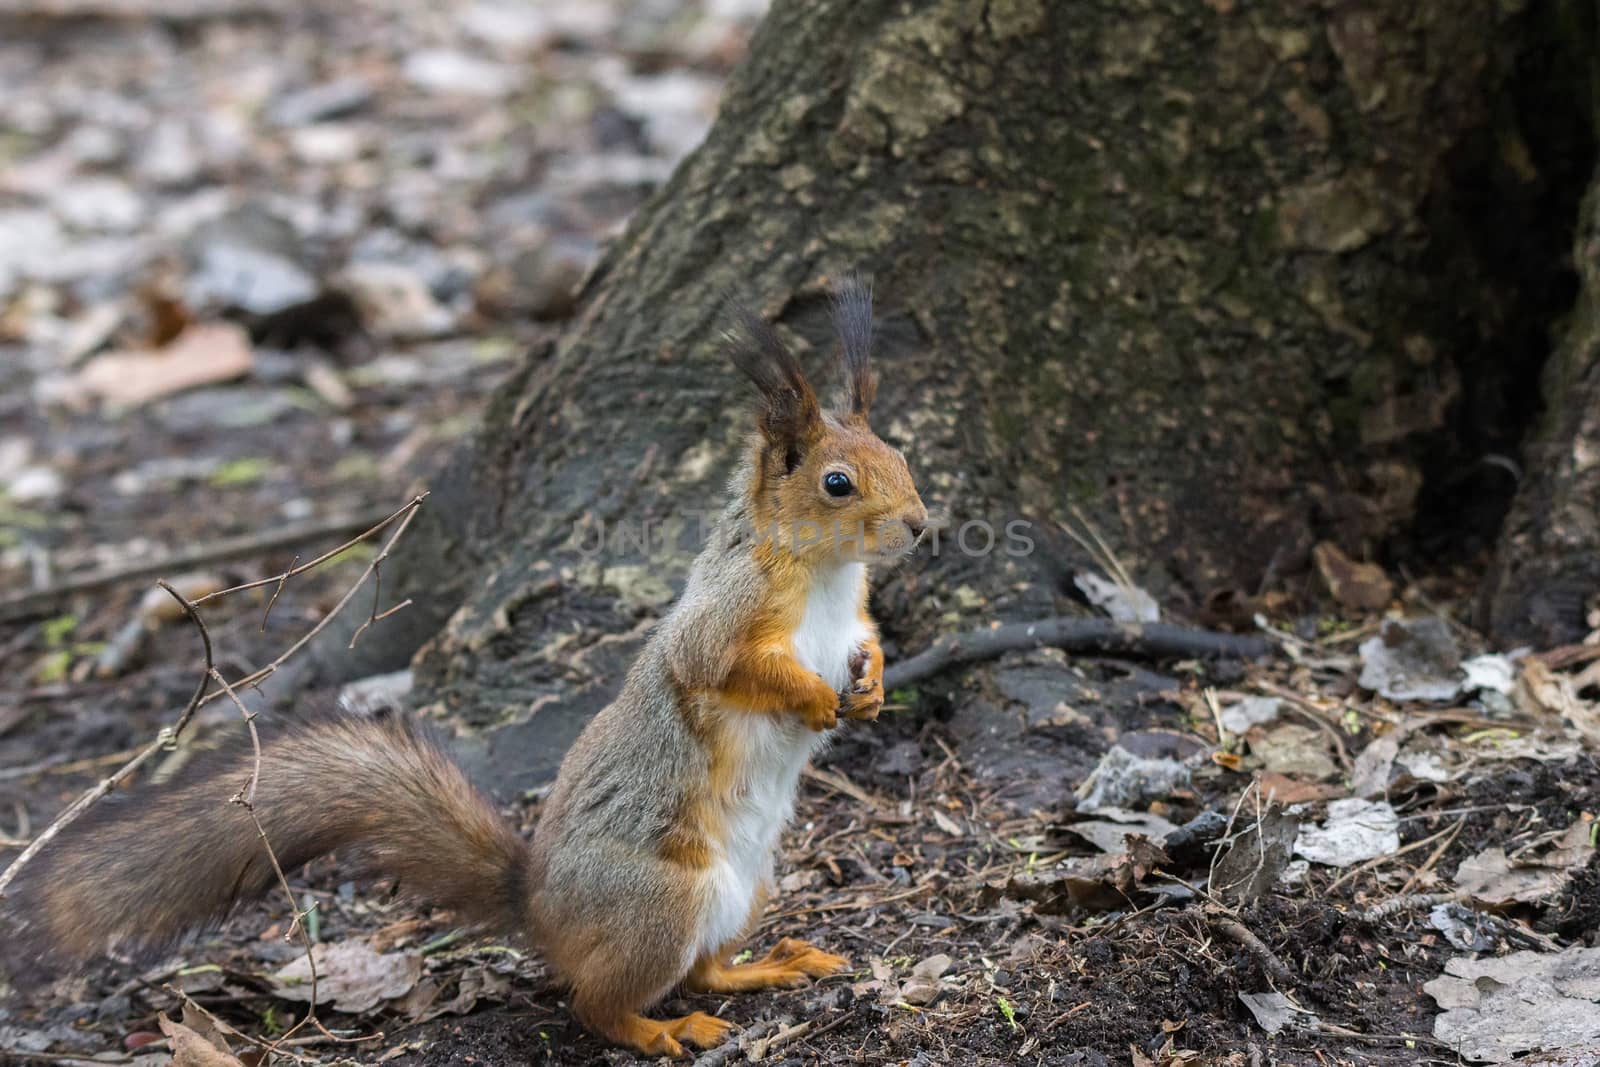 the photograph shows a squirrel on a tree